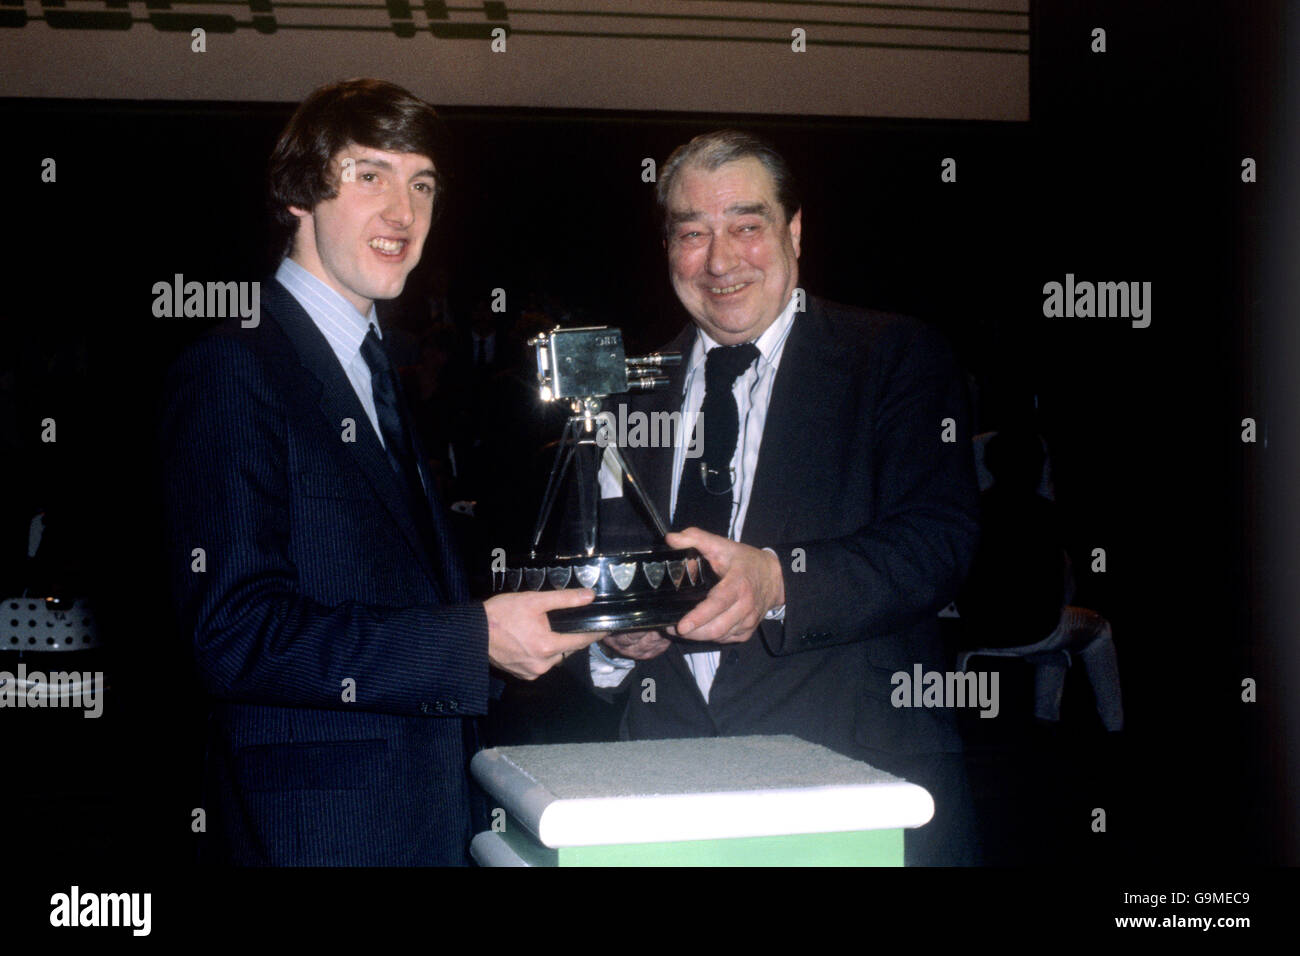 Olympic figure skating gold medallist Robin Cousins is presented with the BBC Sports Personality of the Year award by cricket commentator John Arlott Stock Photo